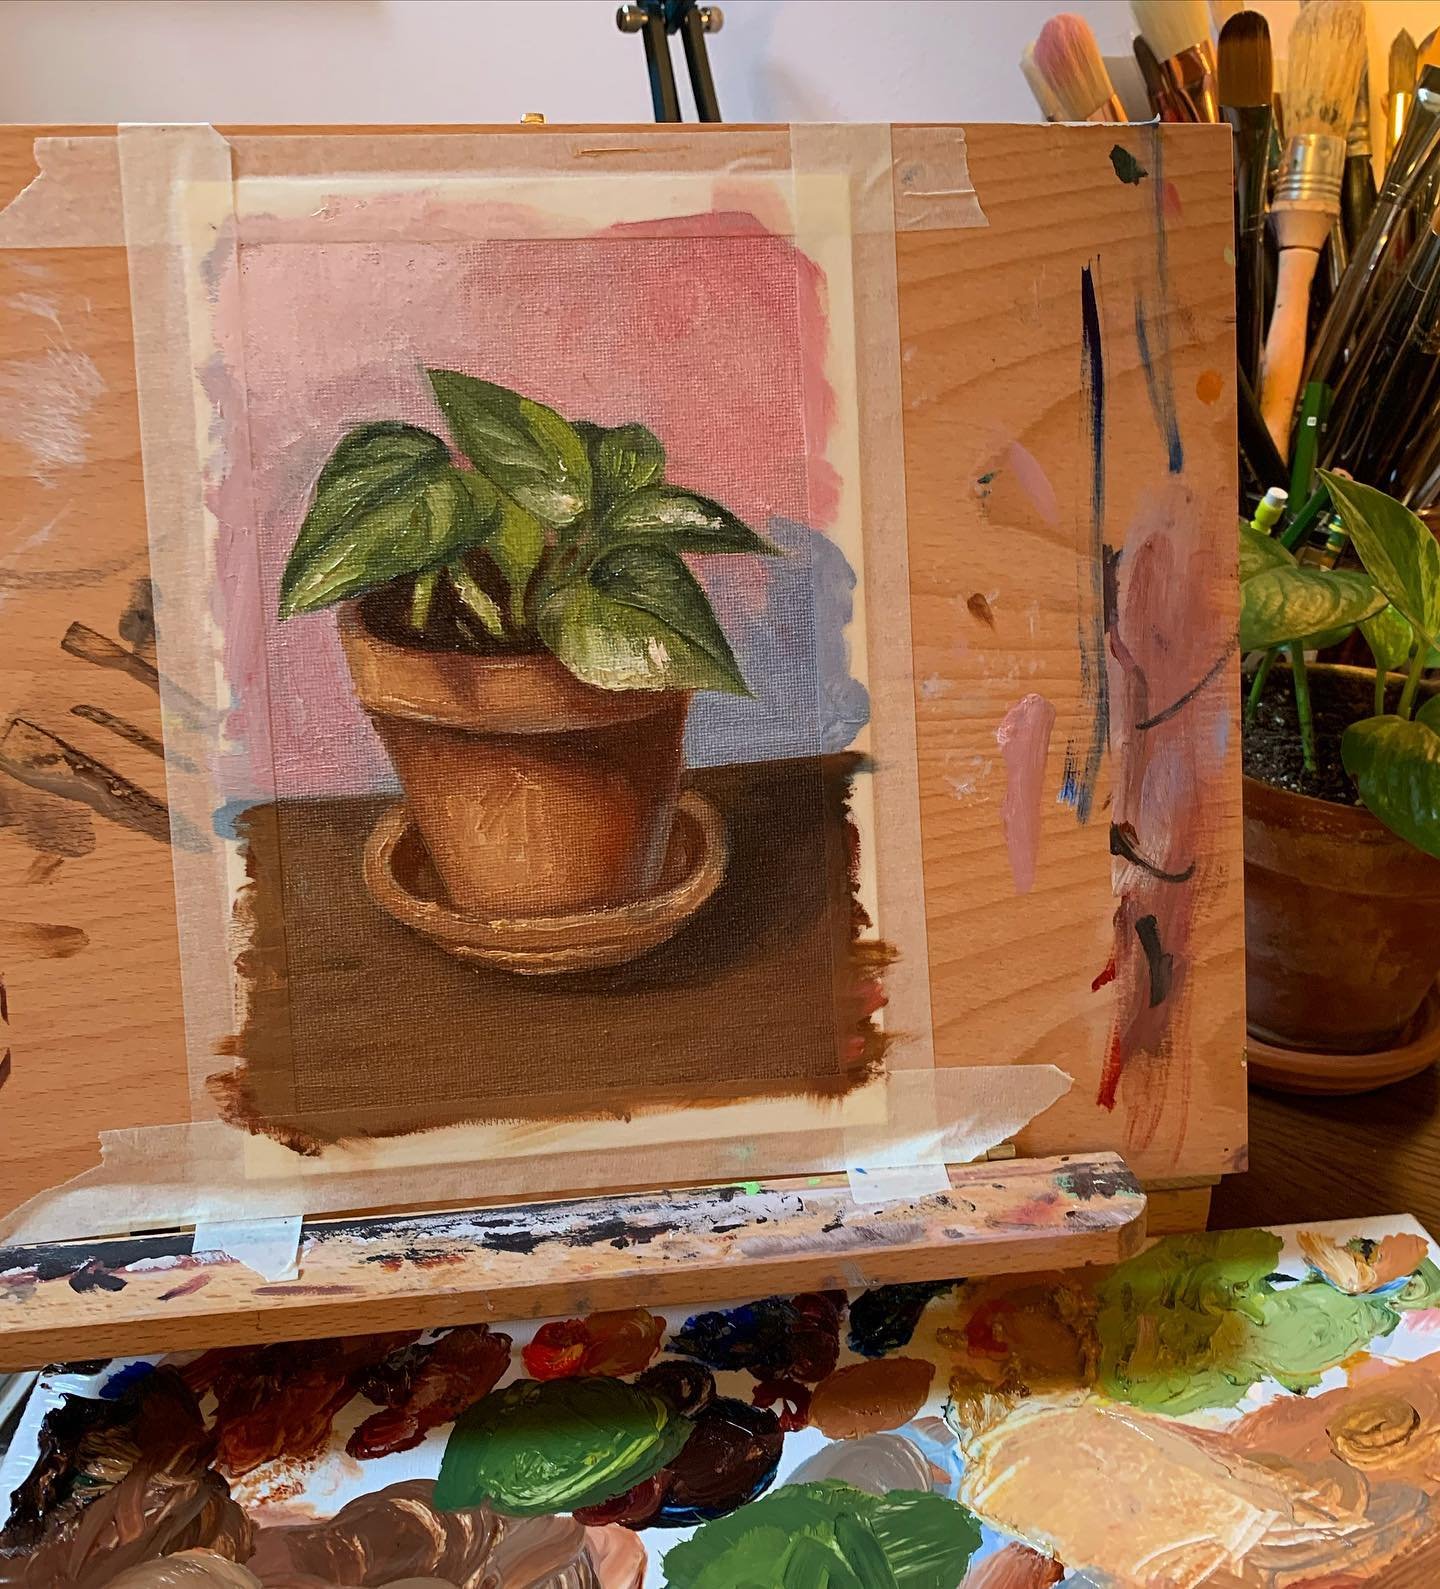 little oil study for a warm up today 🤗 I&rsquo;ve been working verrryyyyy slowly on this series of paintings exploring our human connection with plants since September. To try to get my brain actually moving I&rsquo;m going to start doing little war